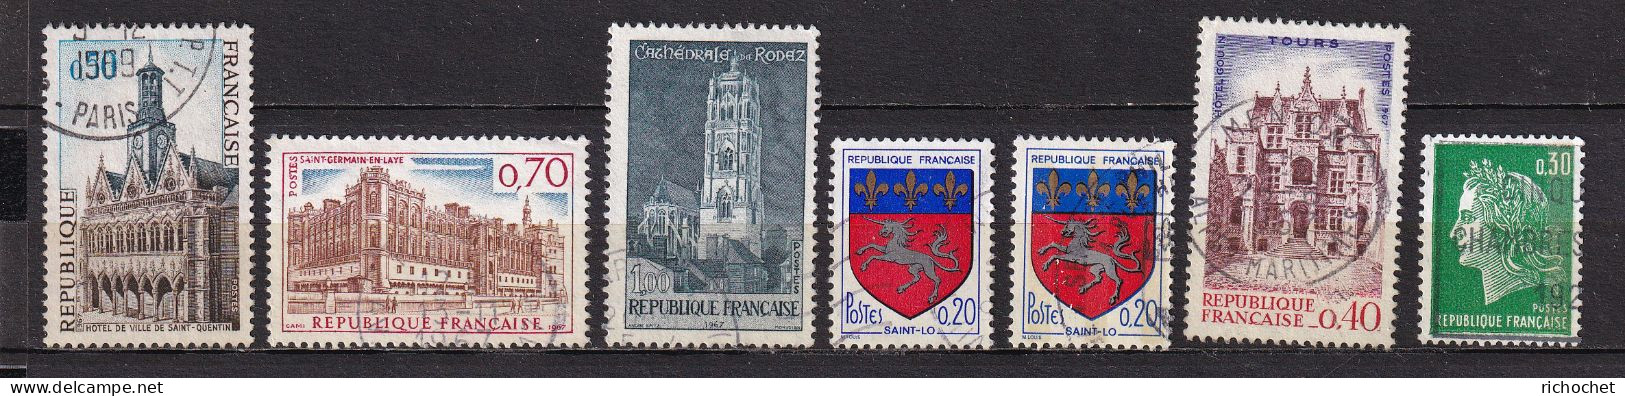 France 1499 + 1501 + 1504 + 1510 + 1510c + 1525 + 1536 A ° - Used Stamps